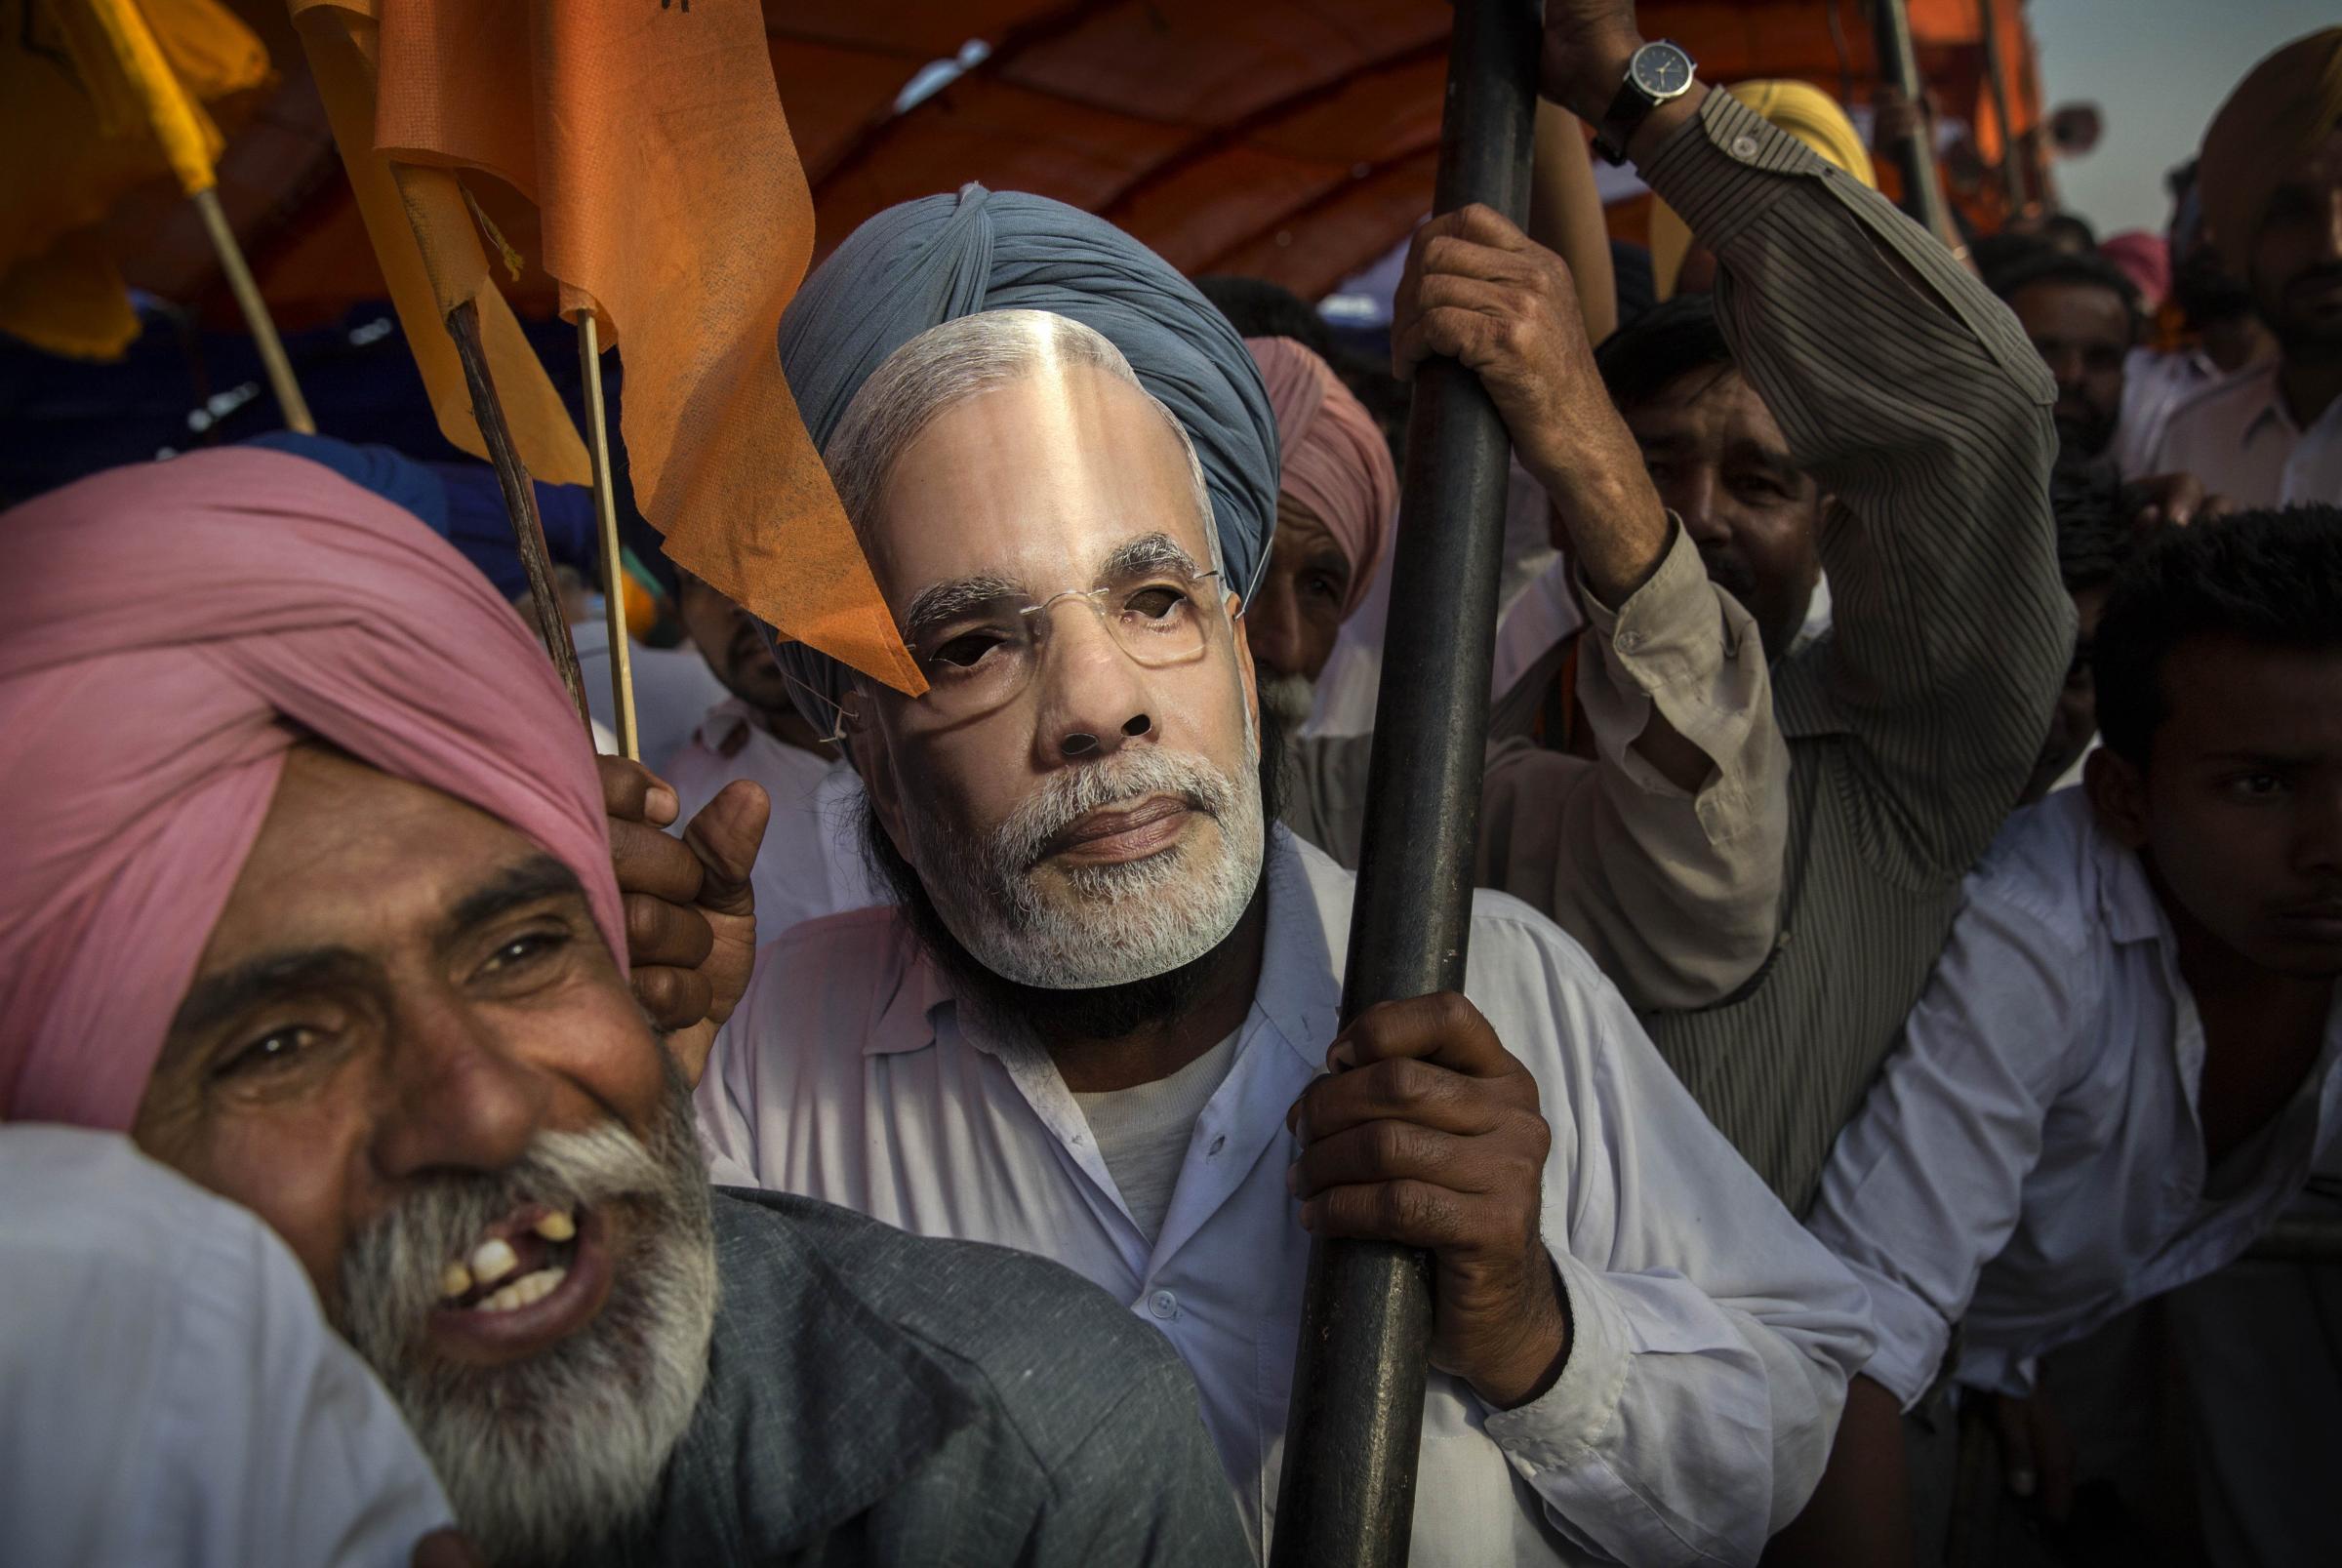 An Indian Sikh man wears a mask of BJP leader Narendra Modi as they crowd to hear his speech on April 25, 2014 in Bathinder, Punjab.